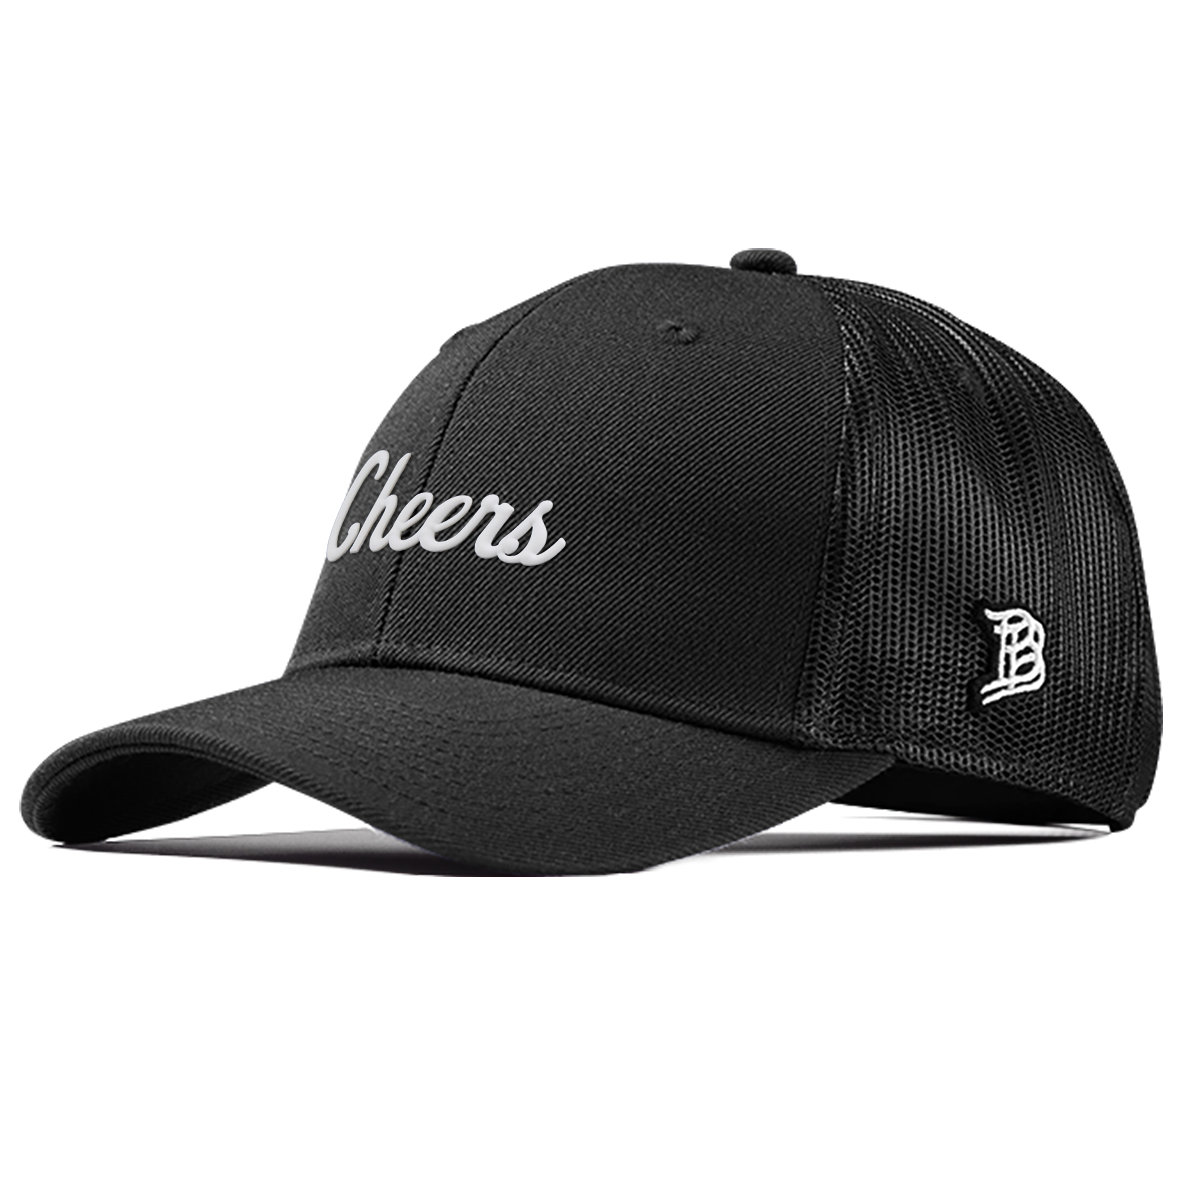 Oversized BB Cheers Curved Trucker Black